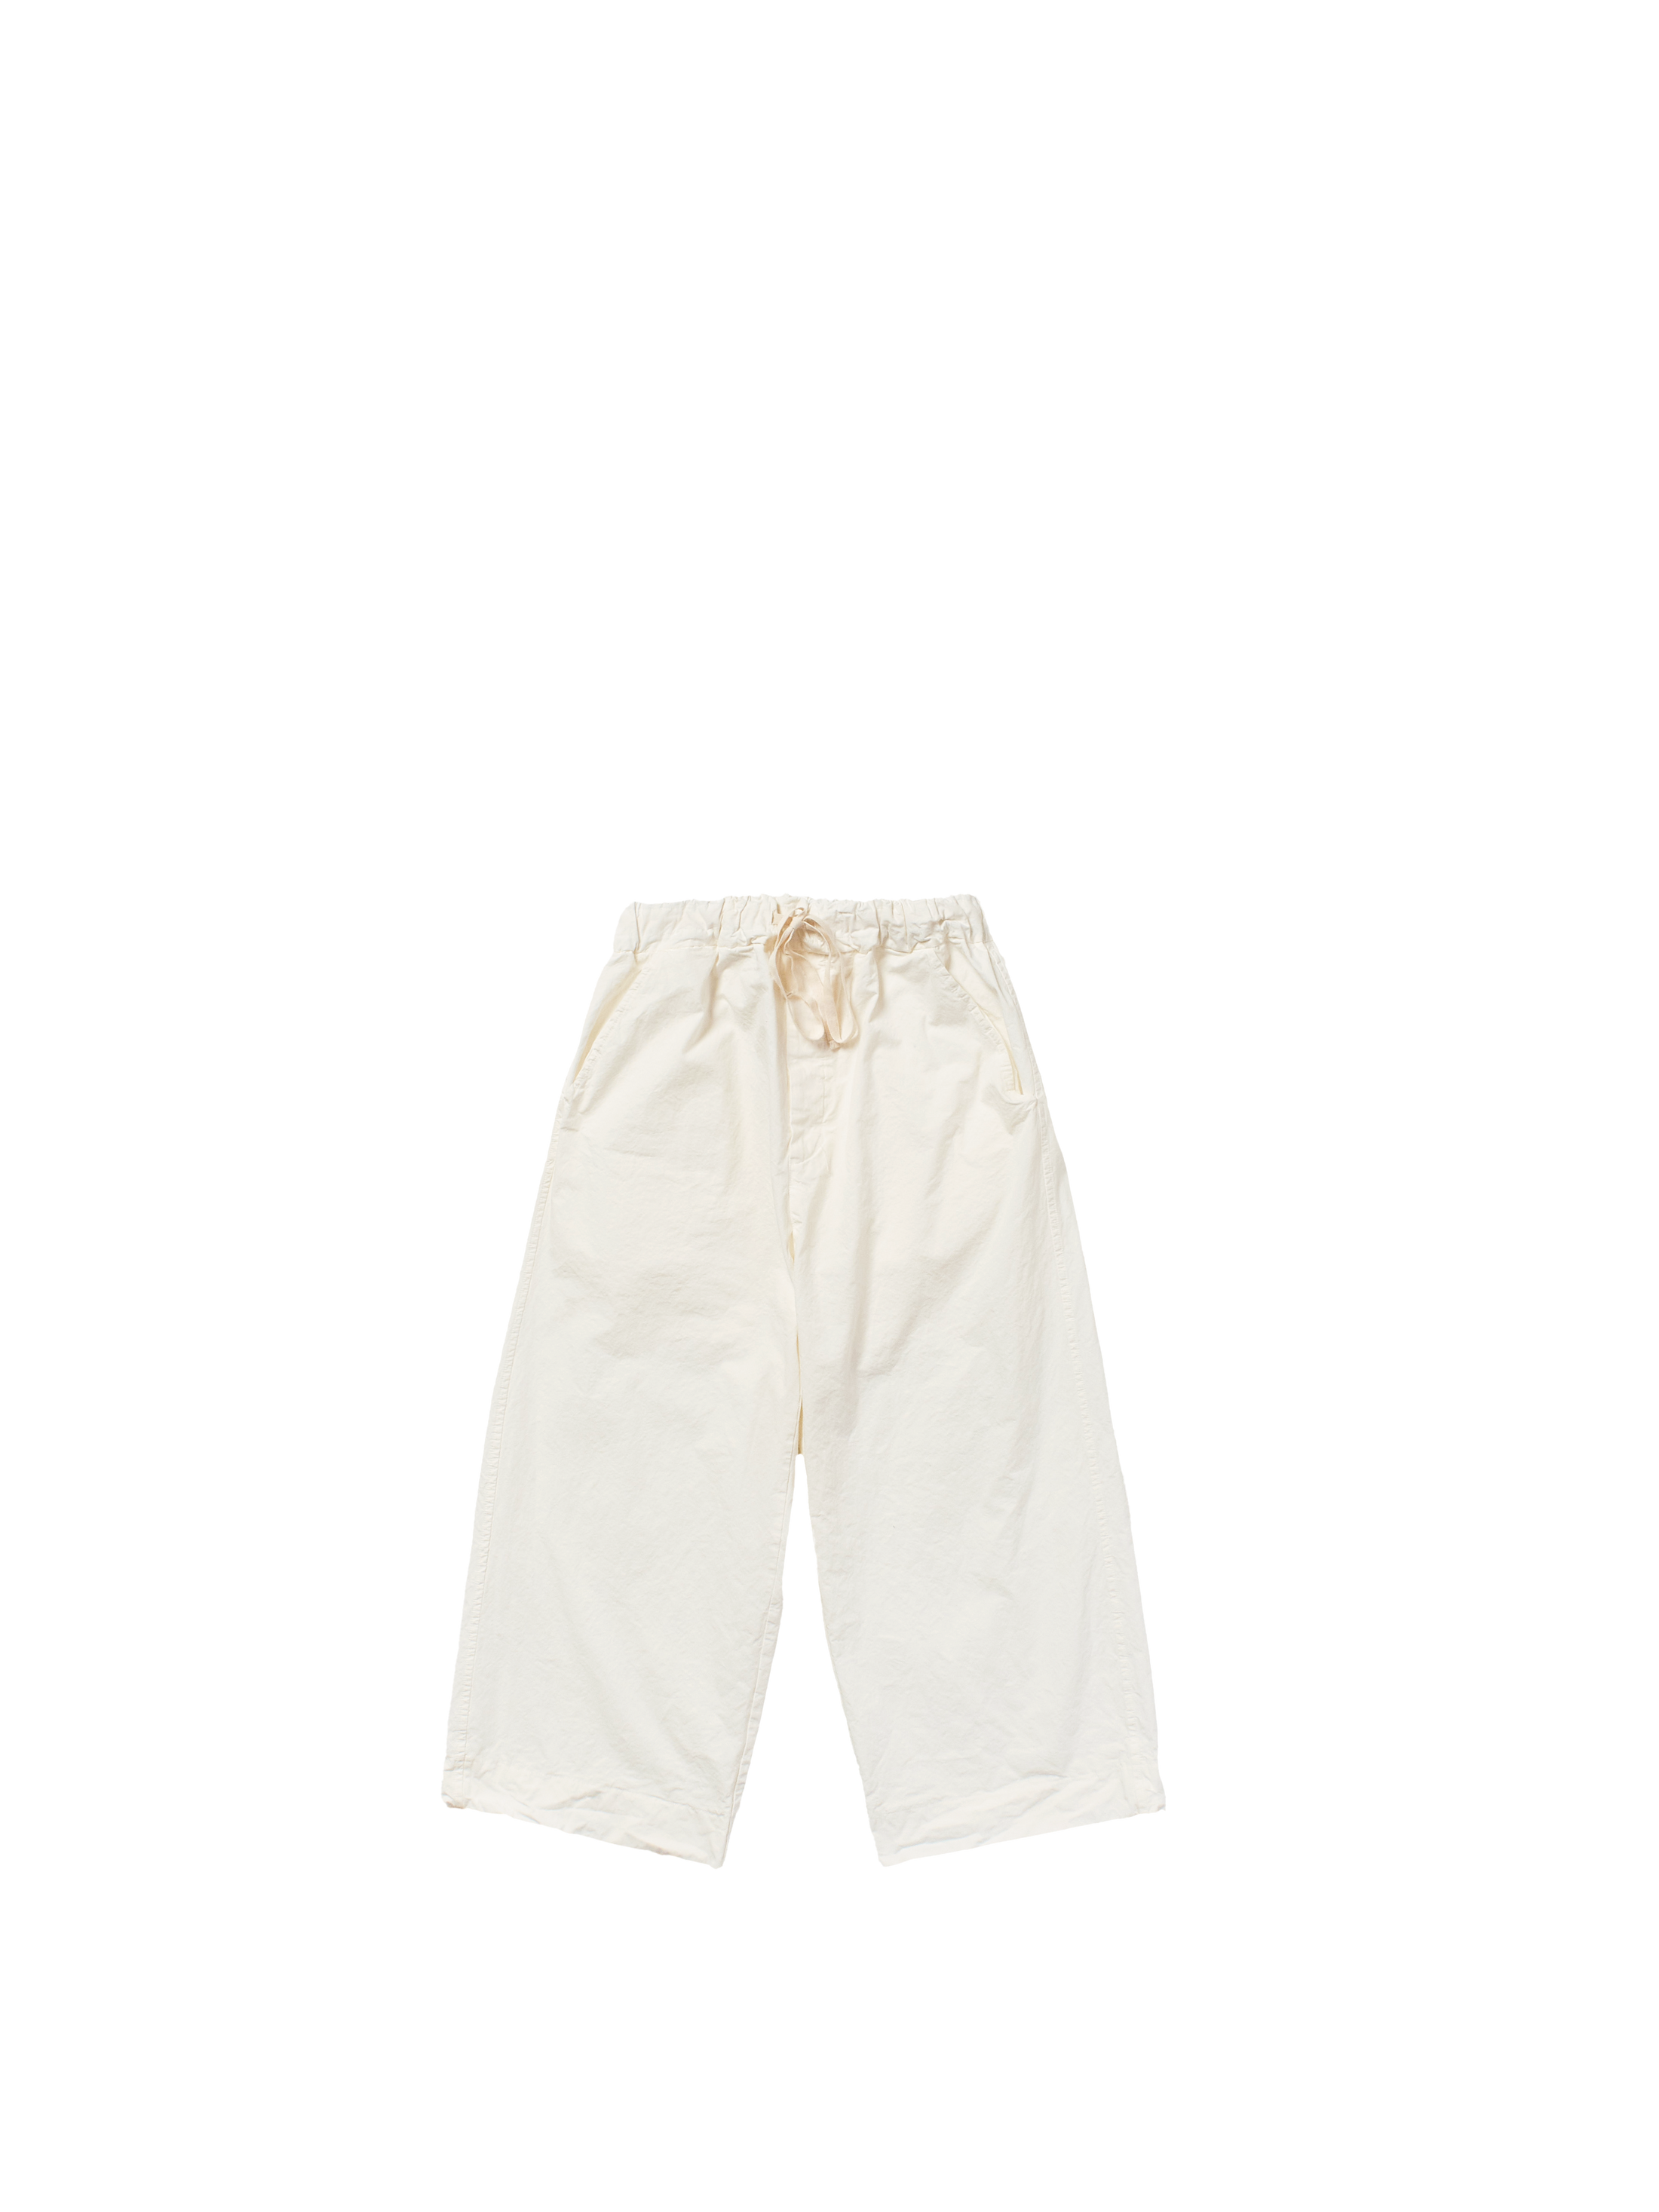 wide & short trousers